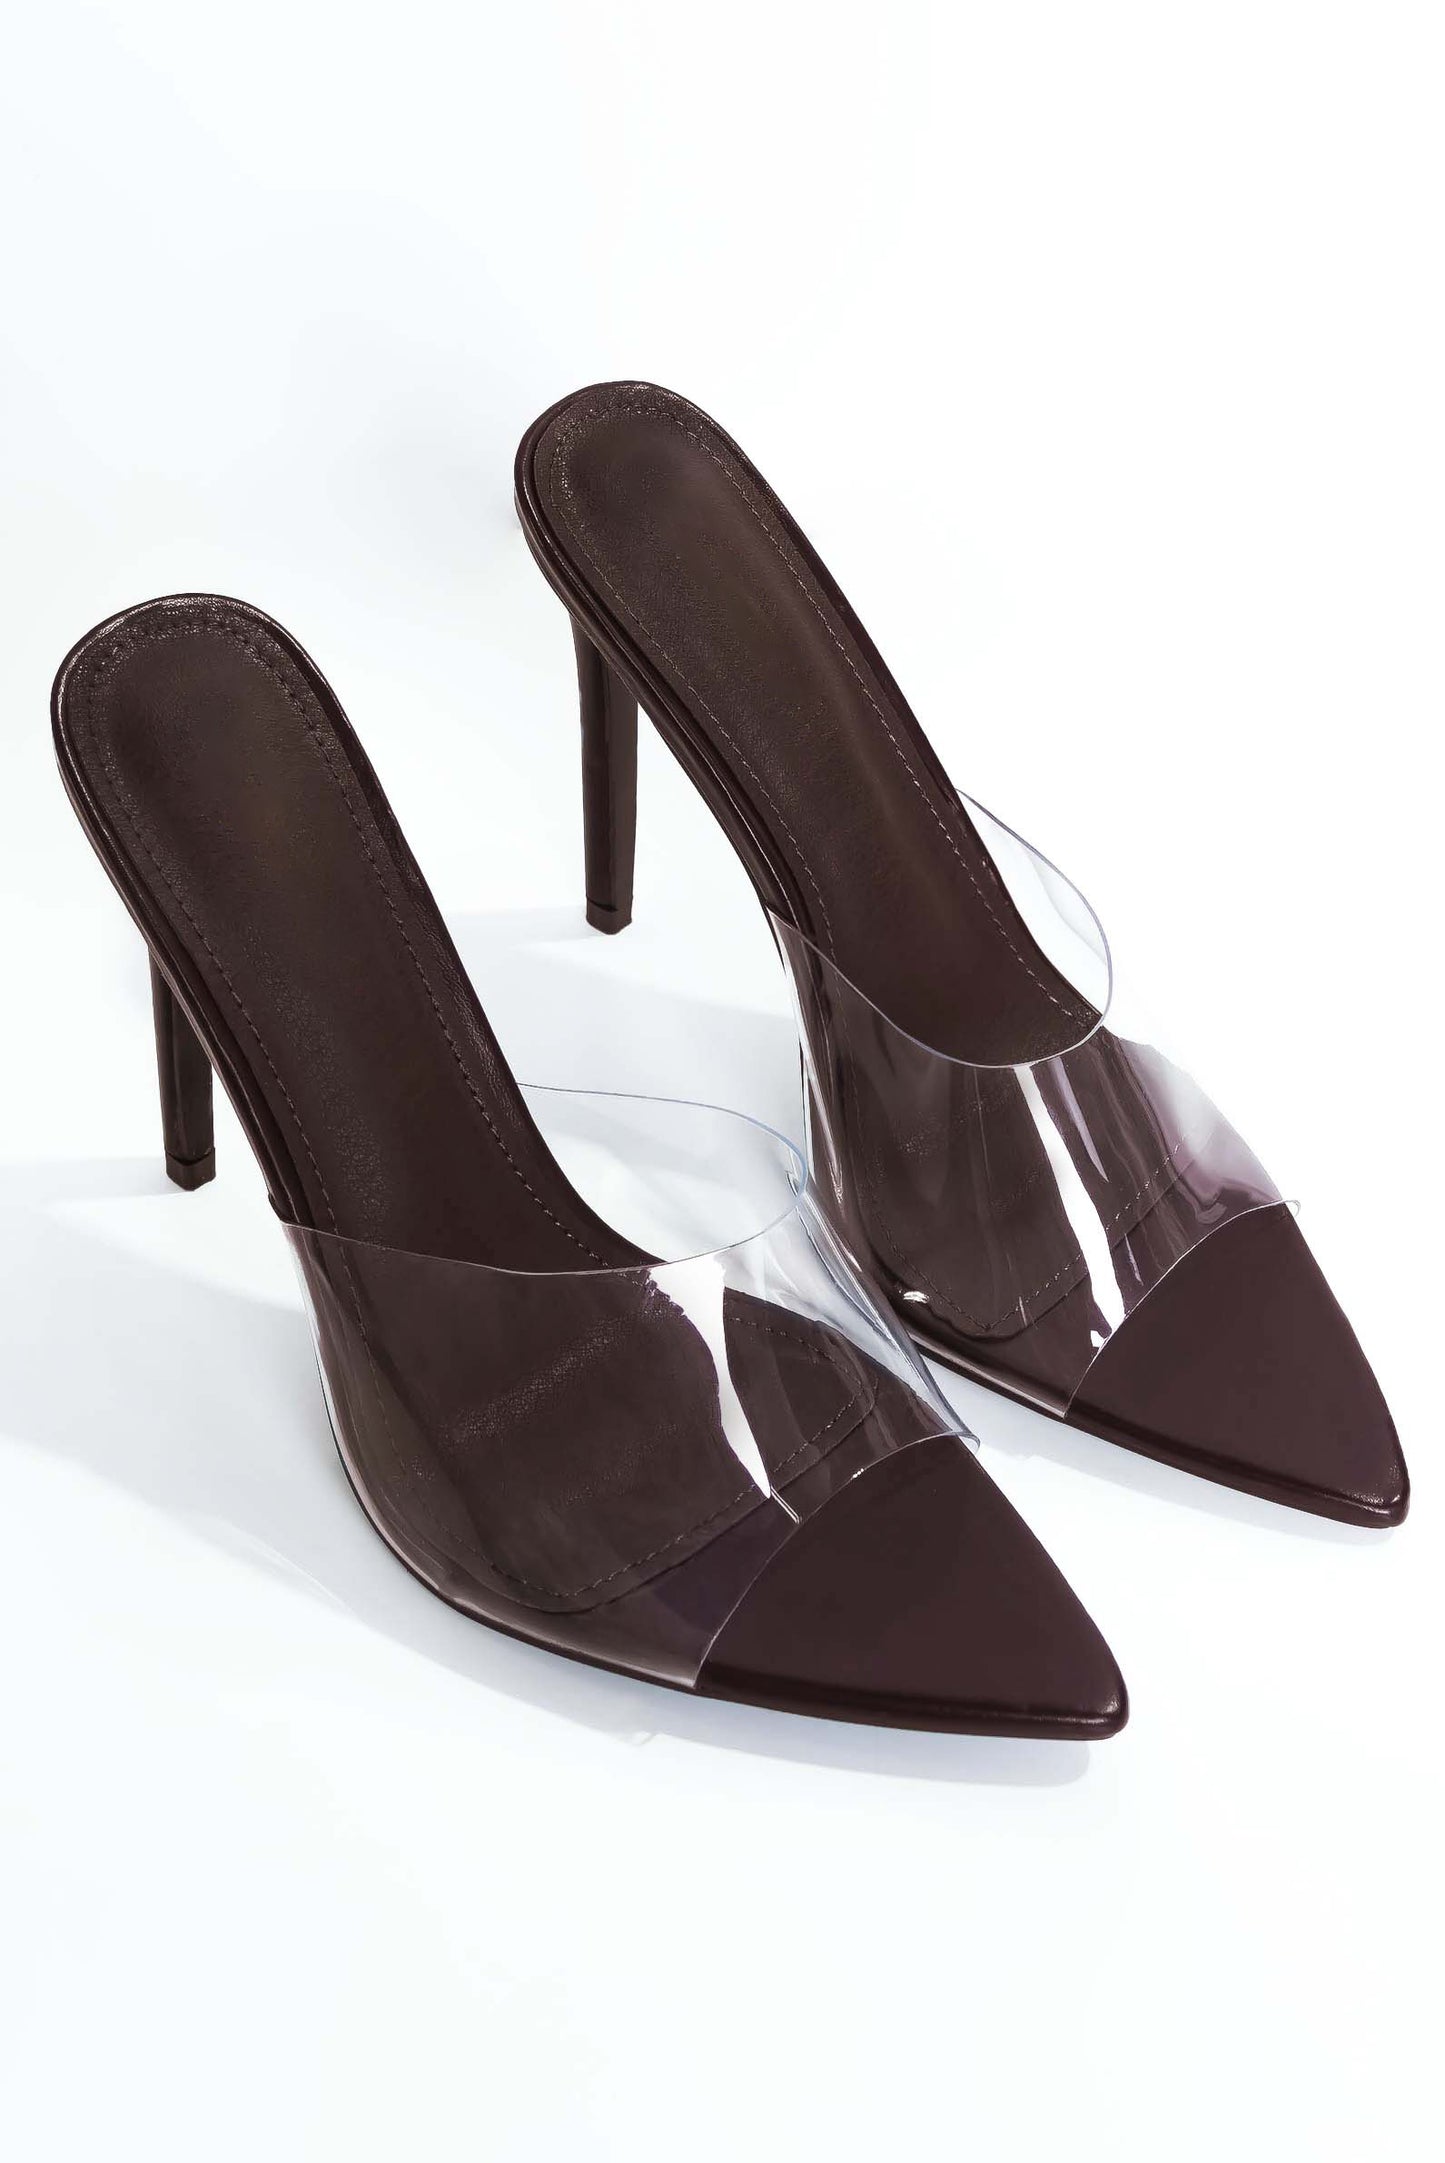 Load image into Gallery viewer, Entitled Heels - Brown
